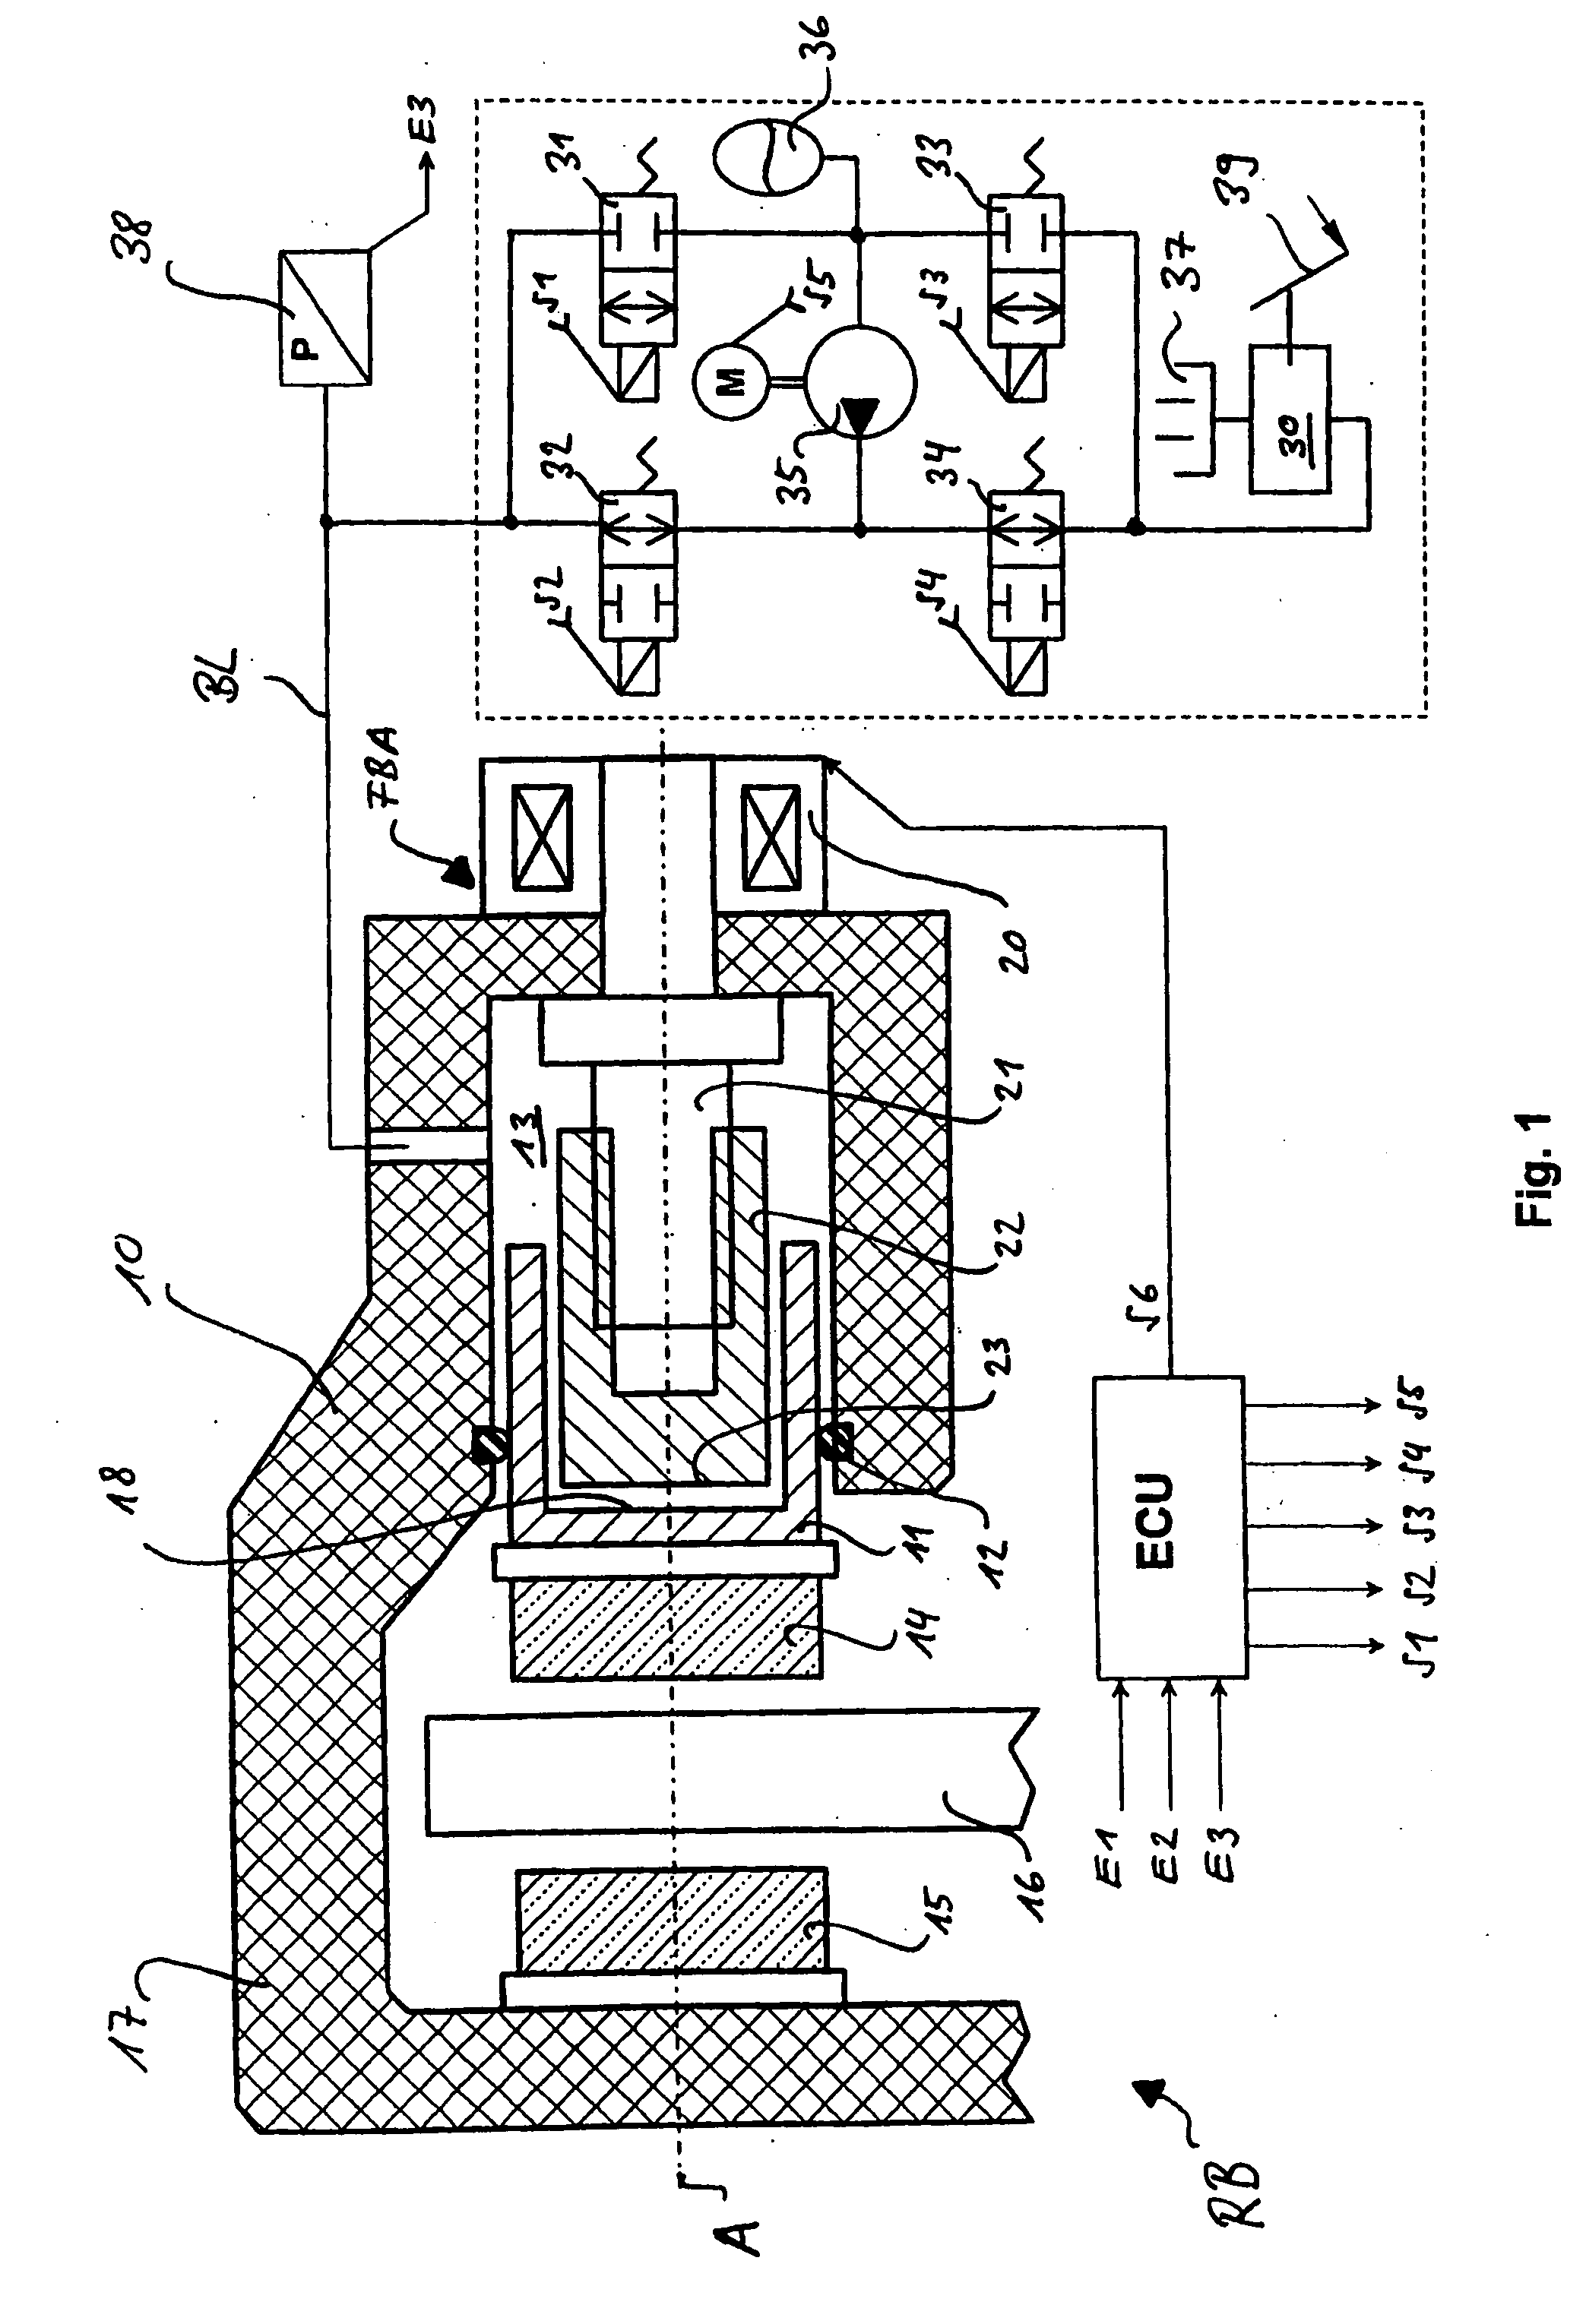 Method for operating the brake gear of a vehicle